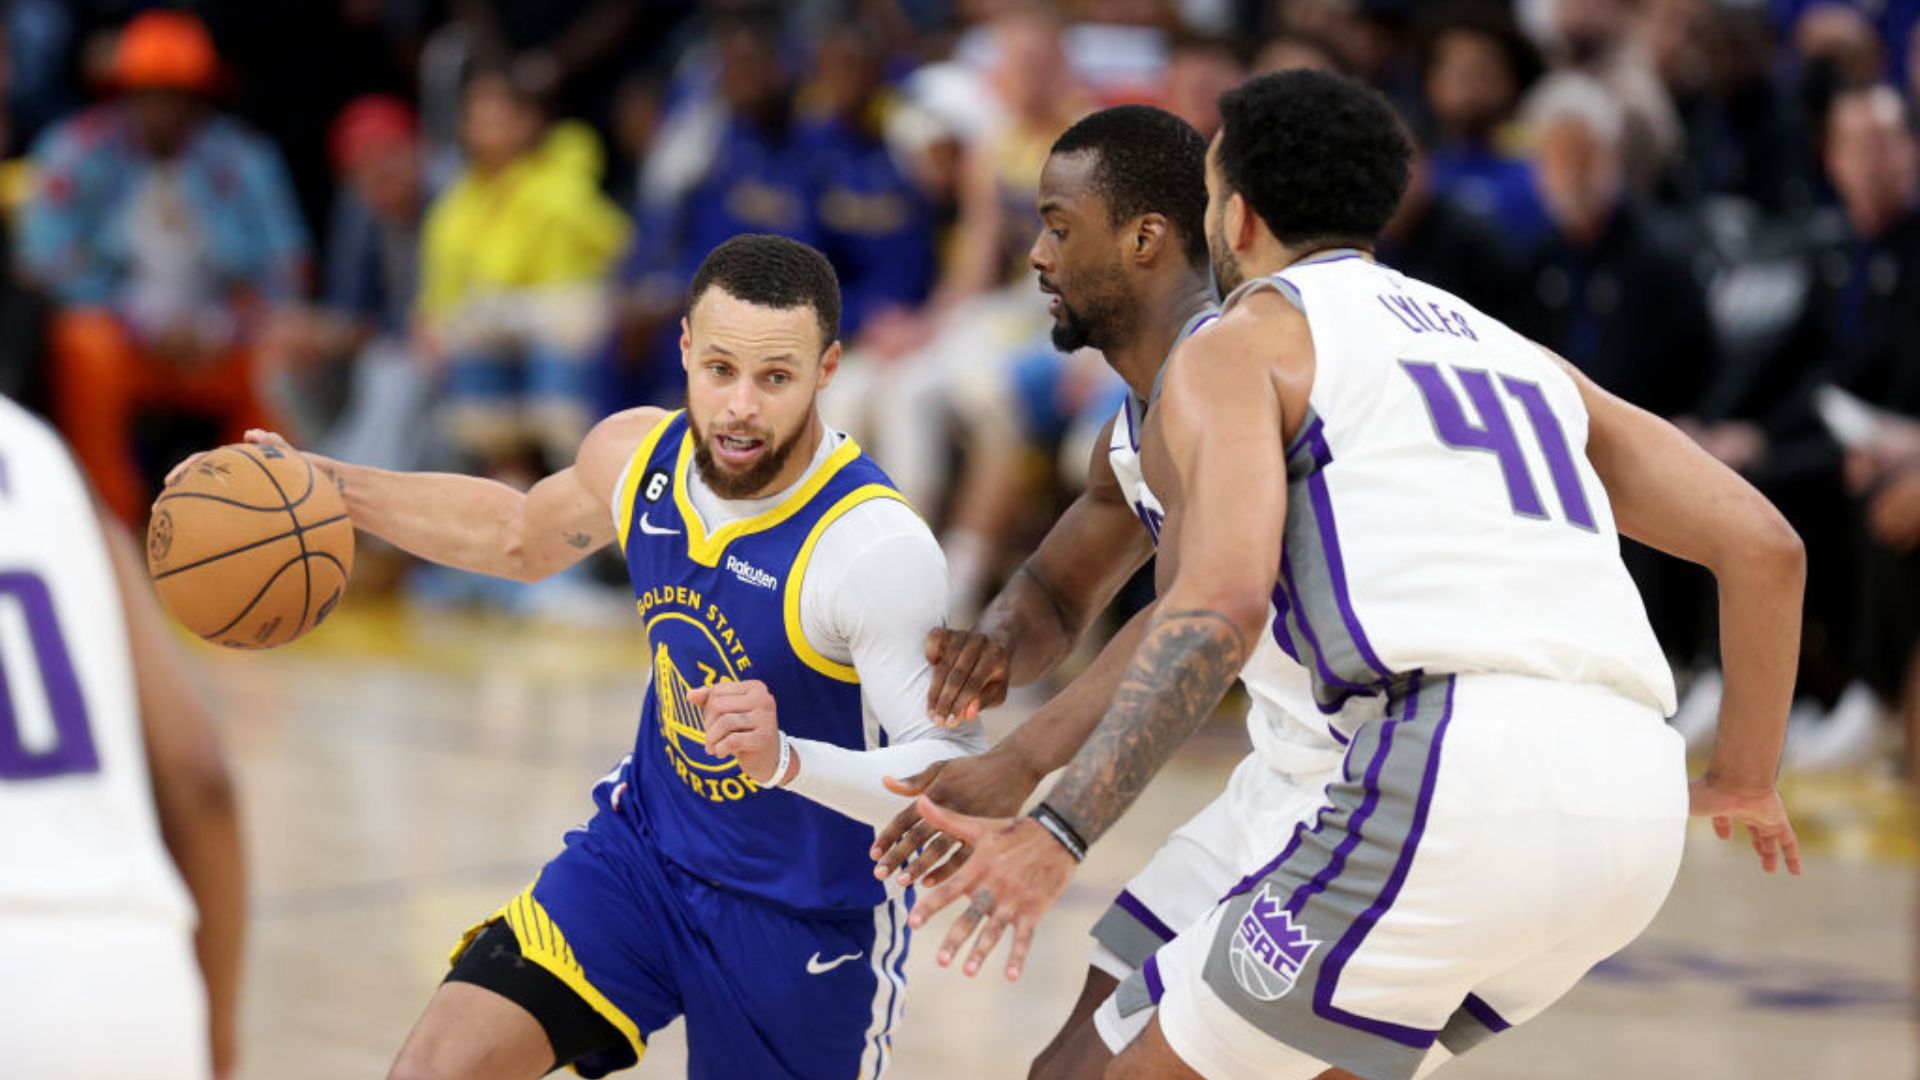 Kings and Curry in NBA action